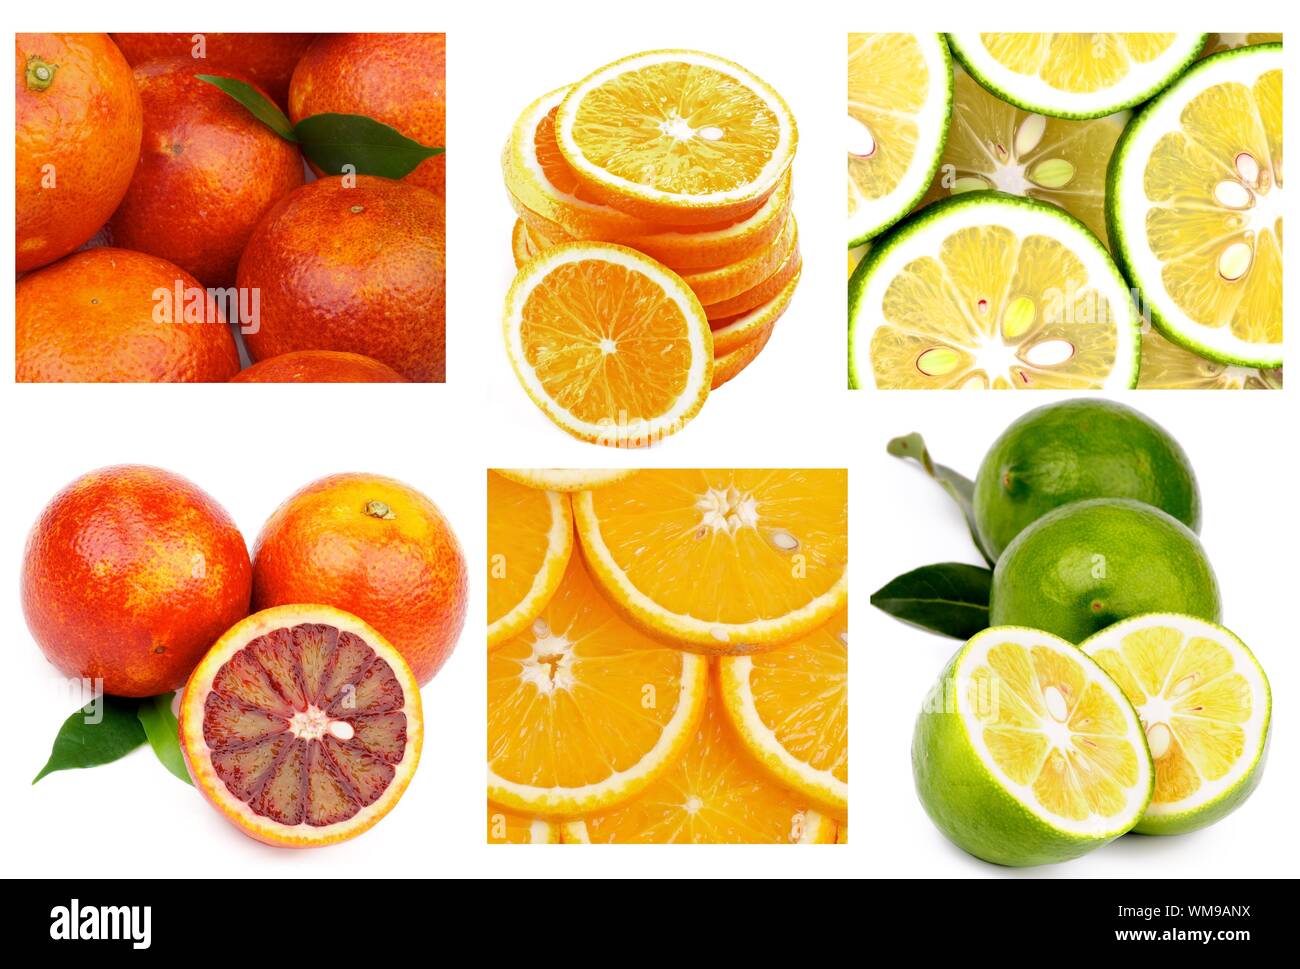 Collection of Citrus Fruits with Blood Oranges, Orange Fruits and Abkhazian Lemons Full Body, Slices and Backgrounds Stock Photo